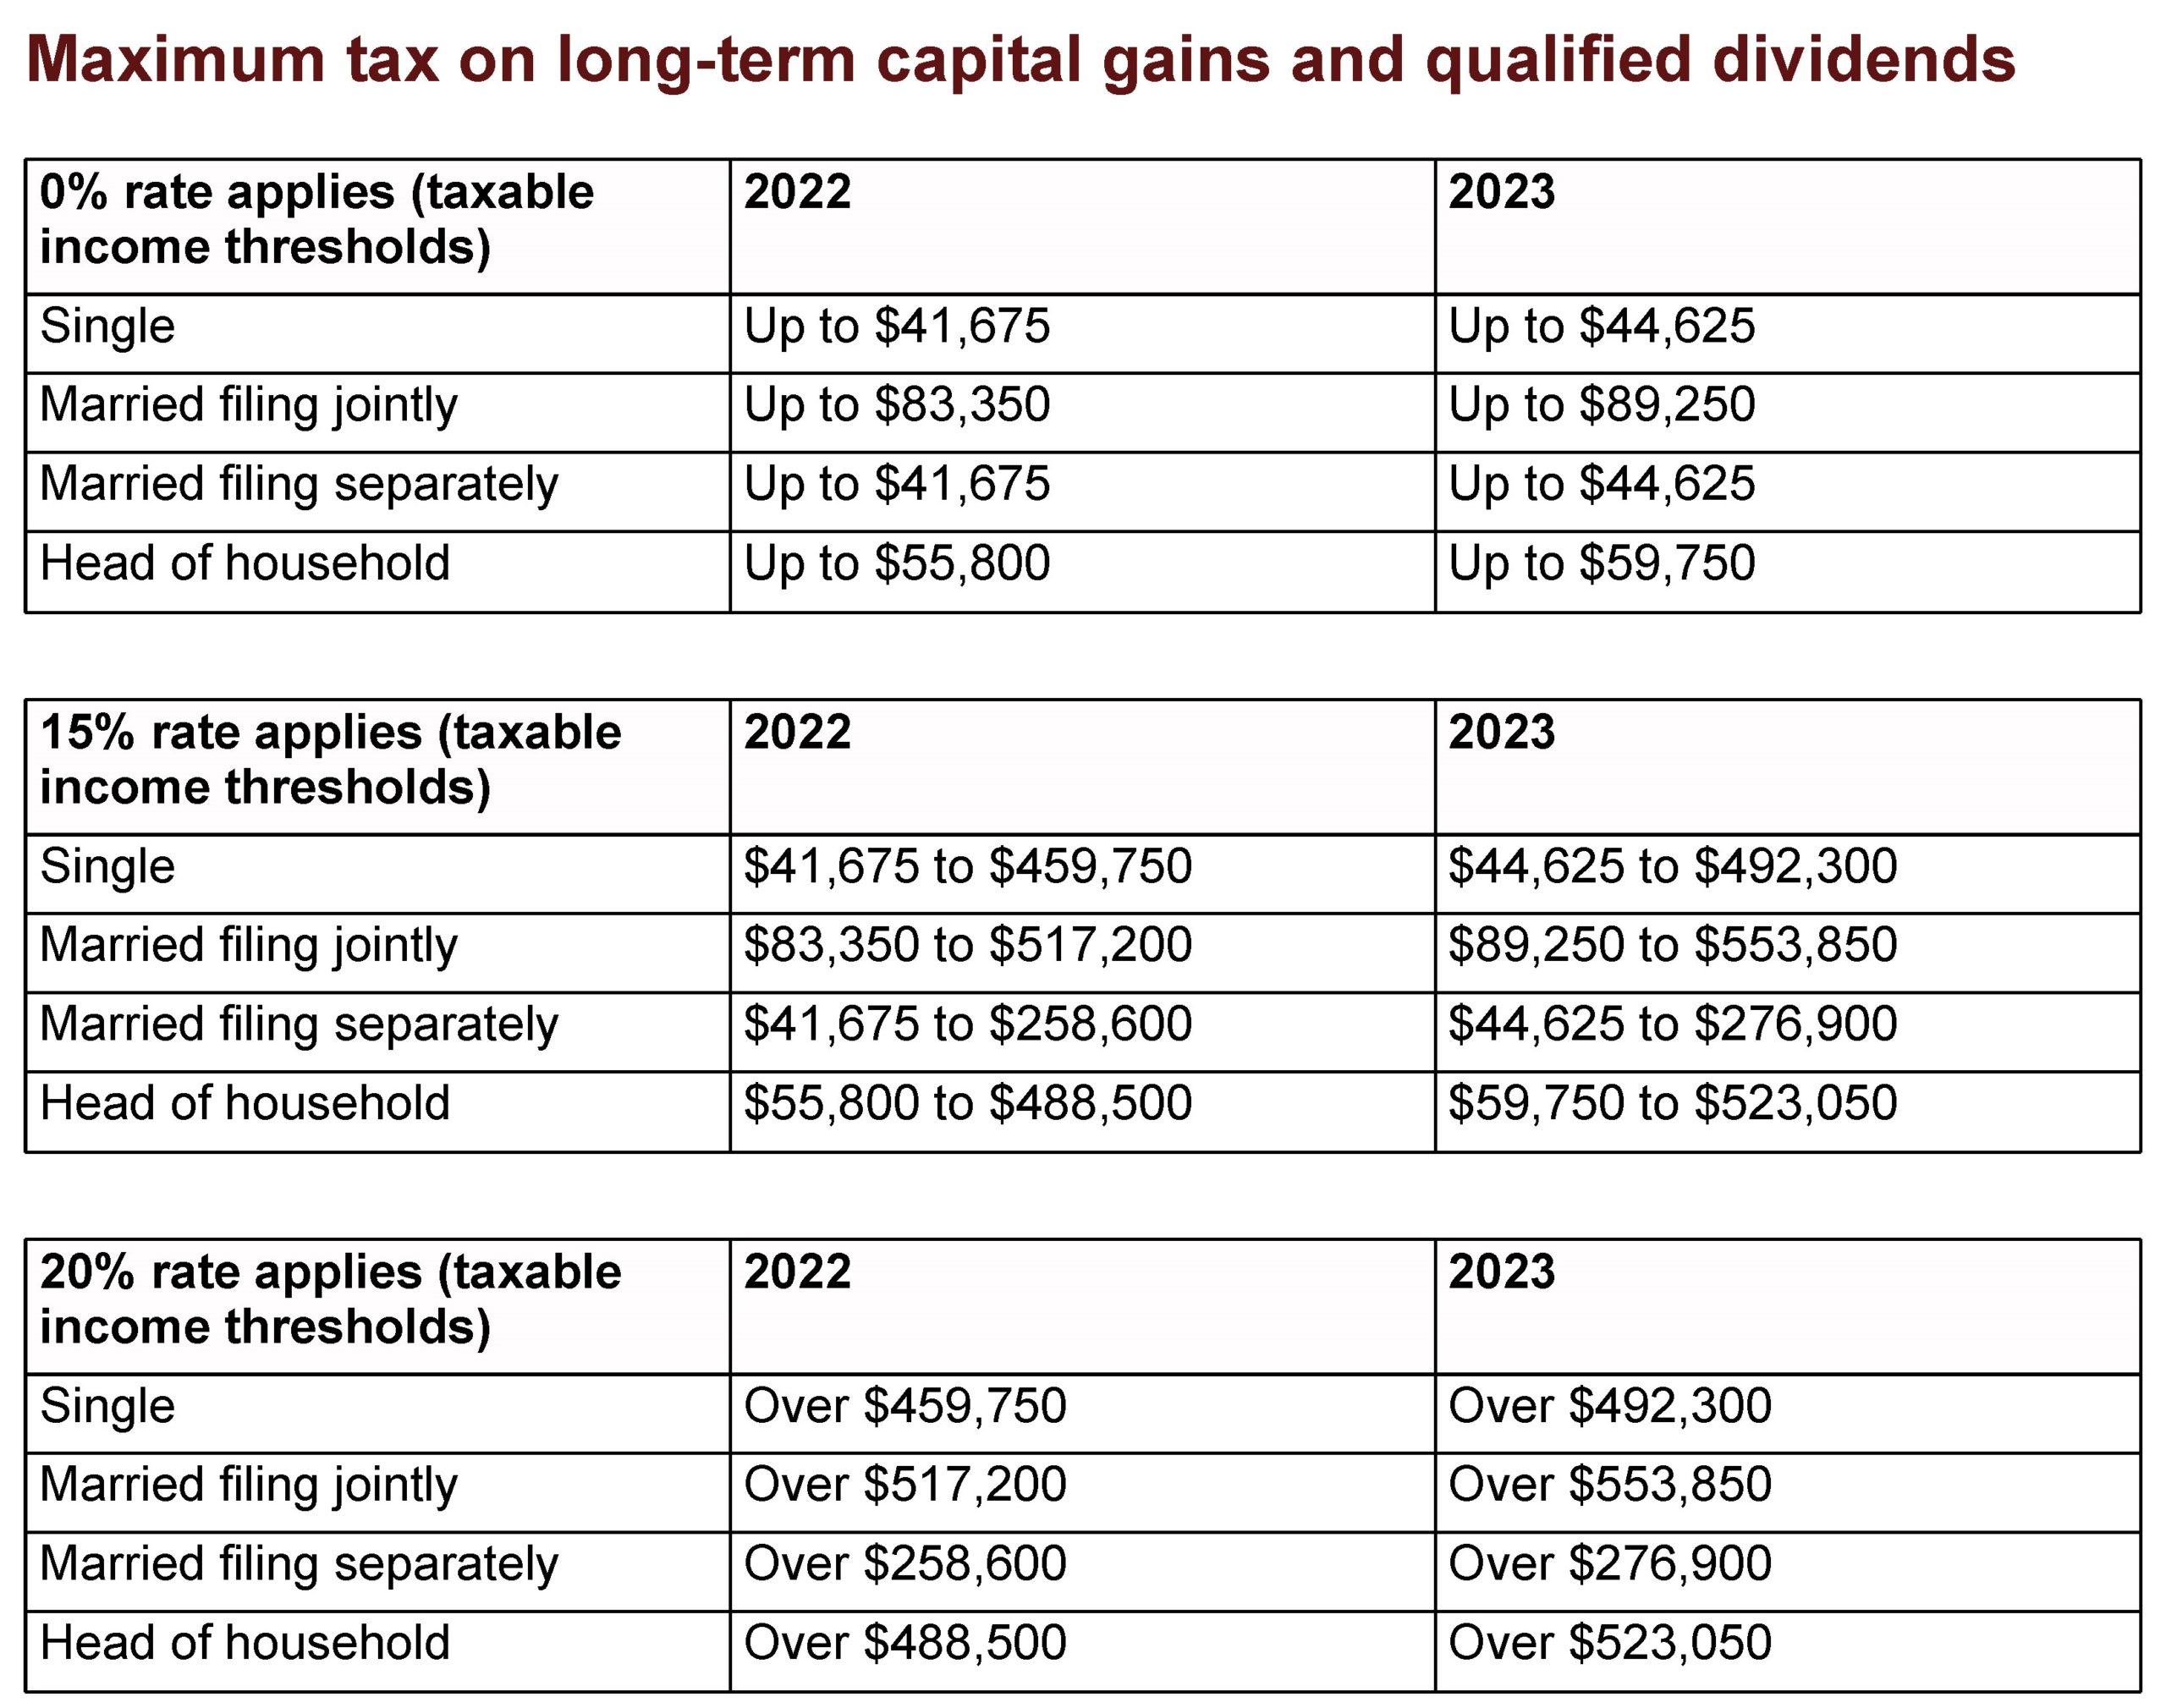 Maximum Tax on Long-Term Capital Gains and Qualified Dividends